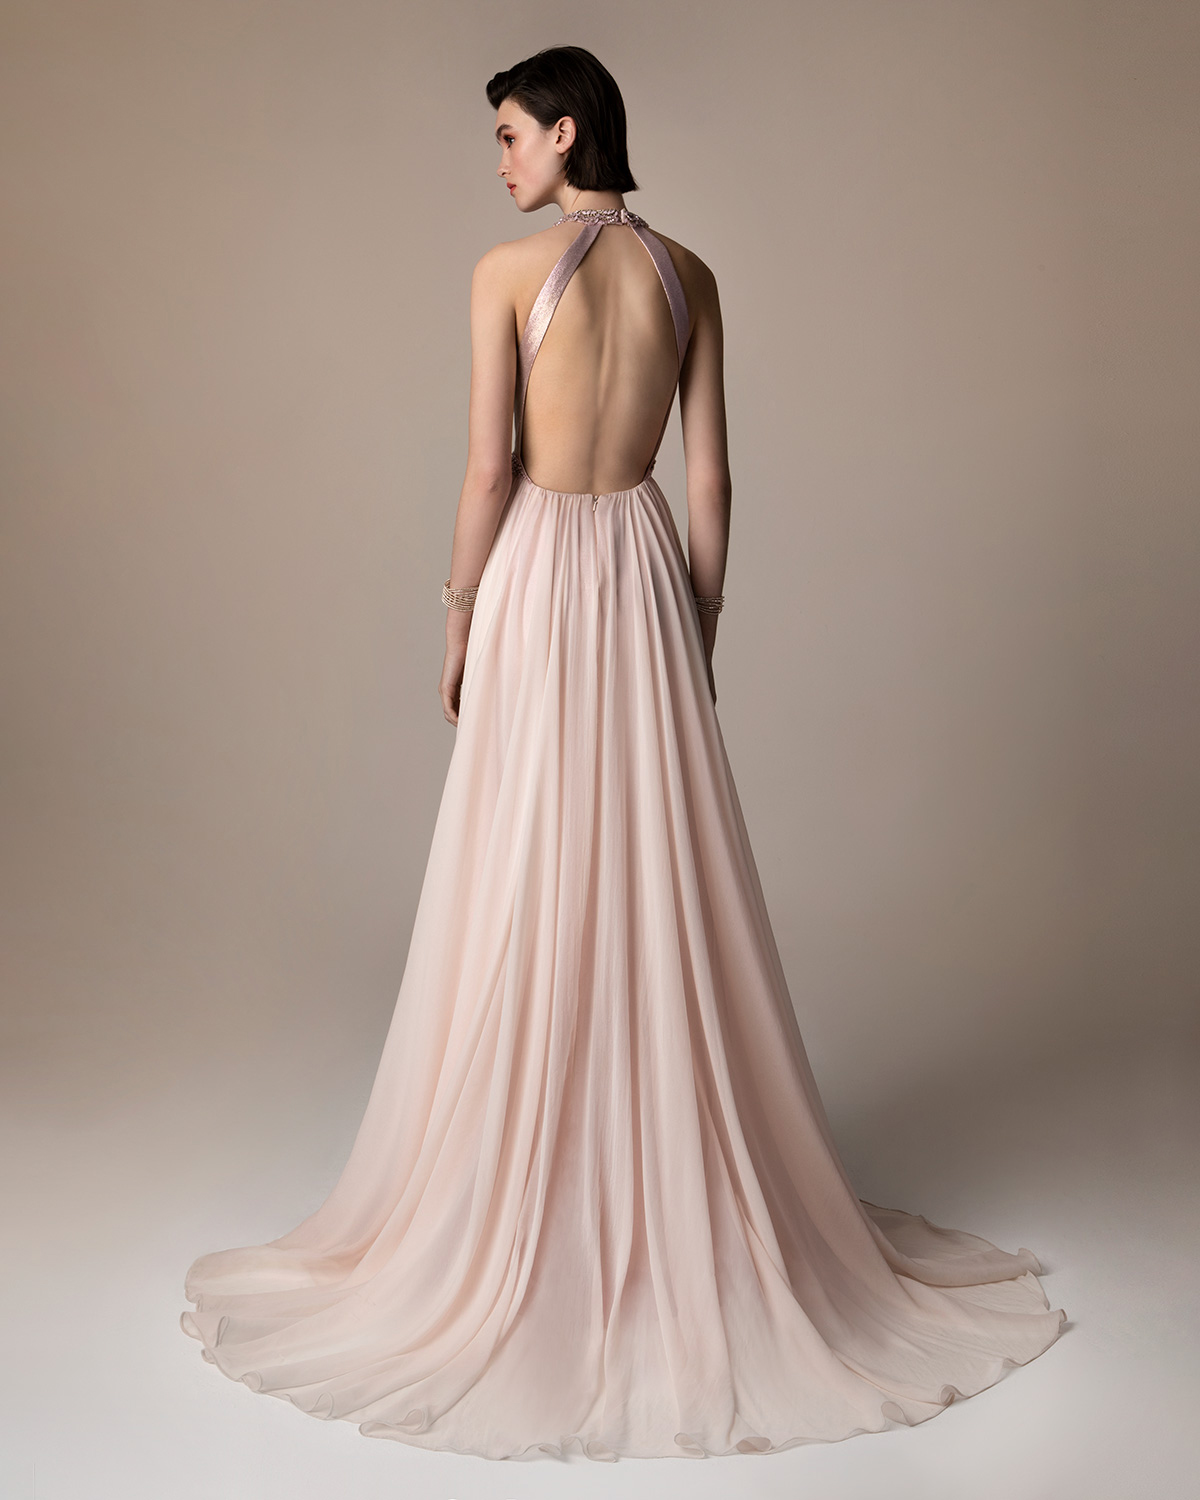 Long evening dress with shining fabric and beading on the neck and the waist